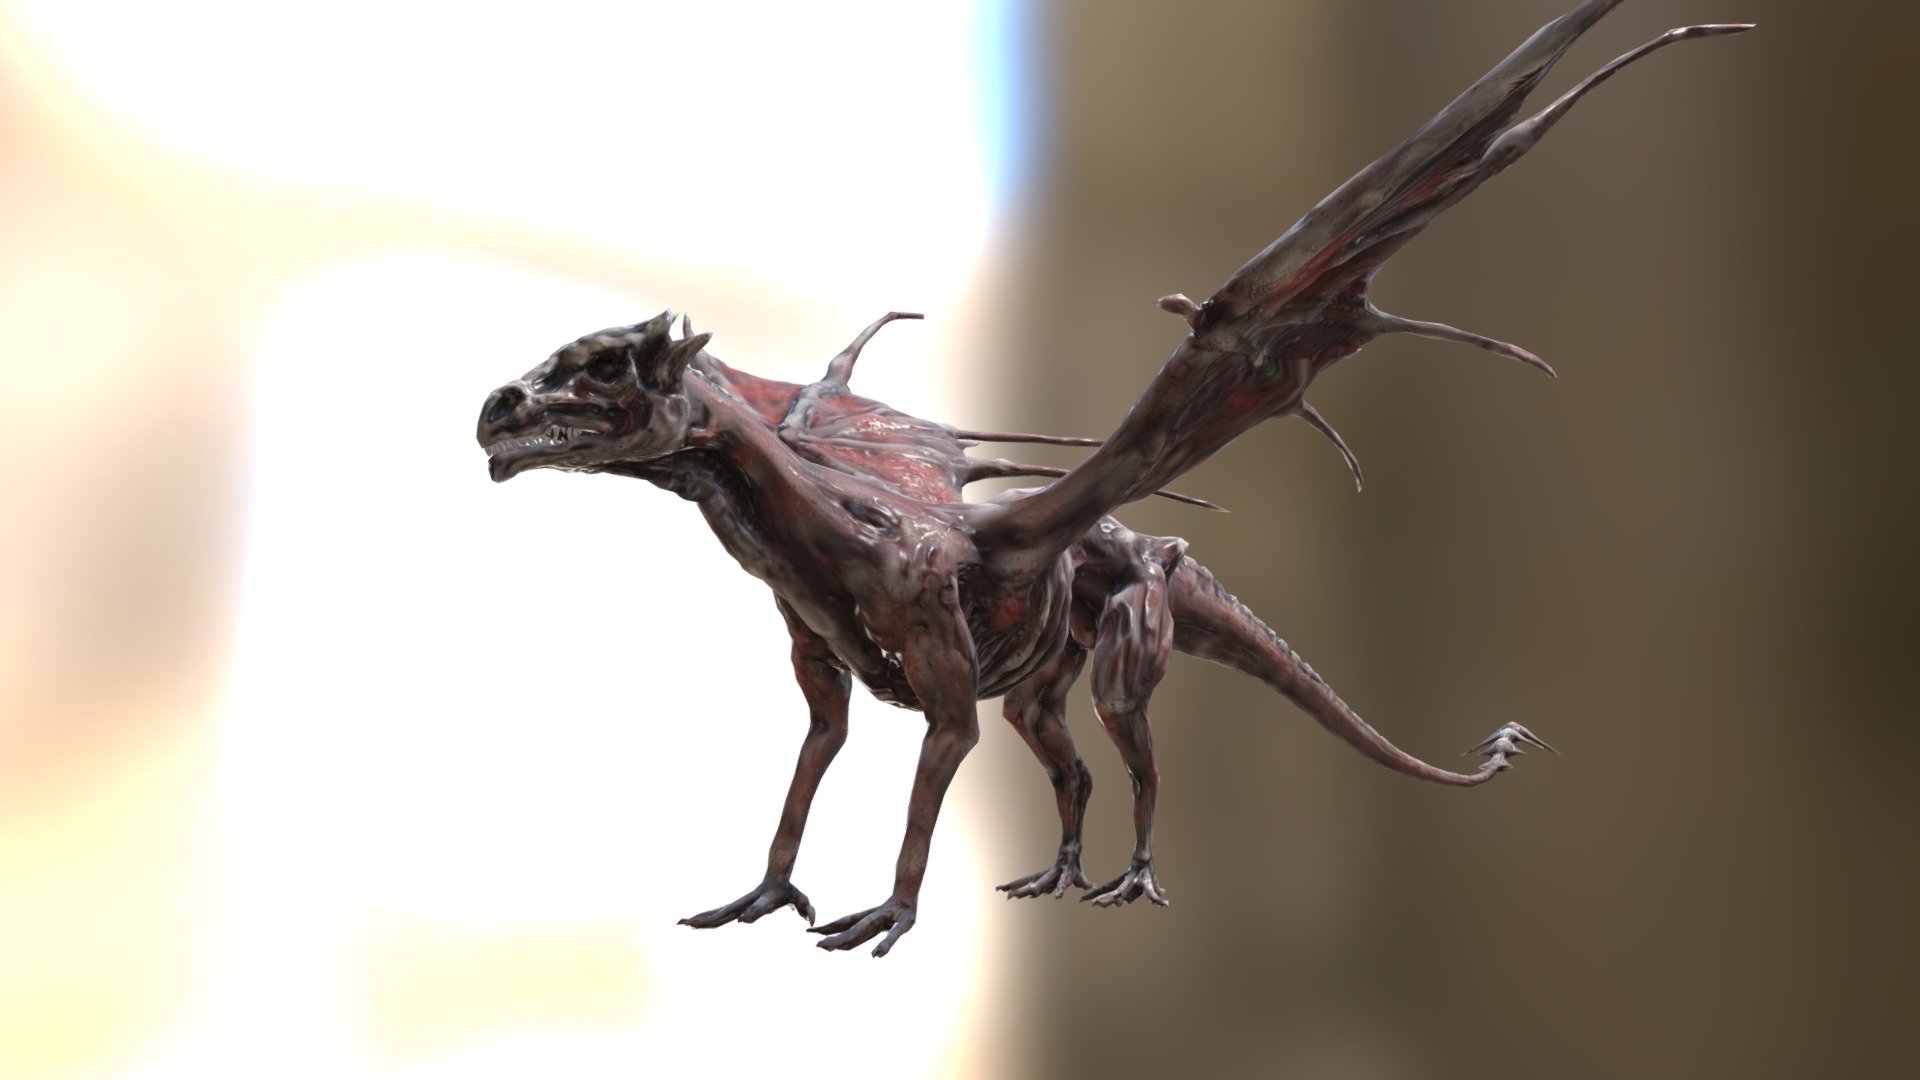 Detailed animated model of an undead dragon.

Contains the dragon model, rigged with 160 bones and 3 realistic animations, roar, walk and flight 3d model